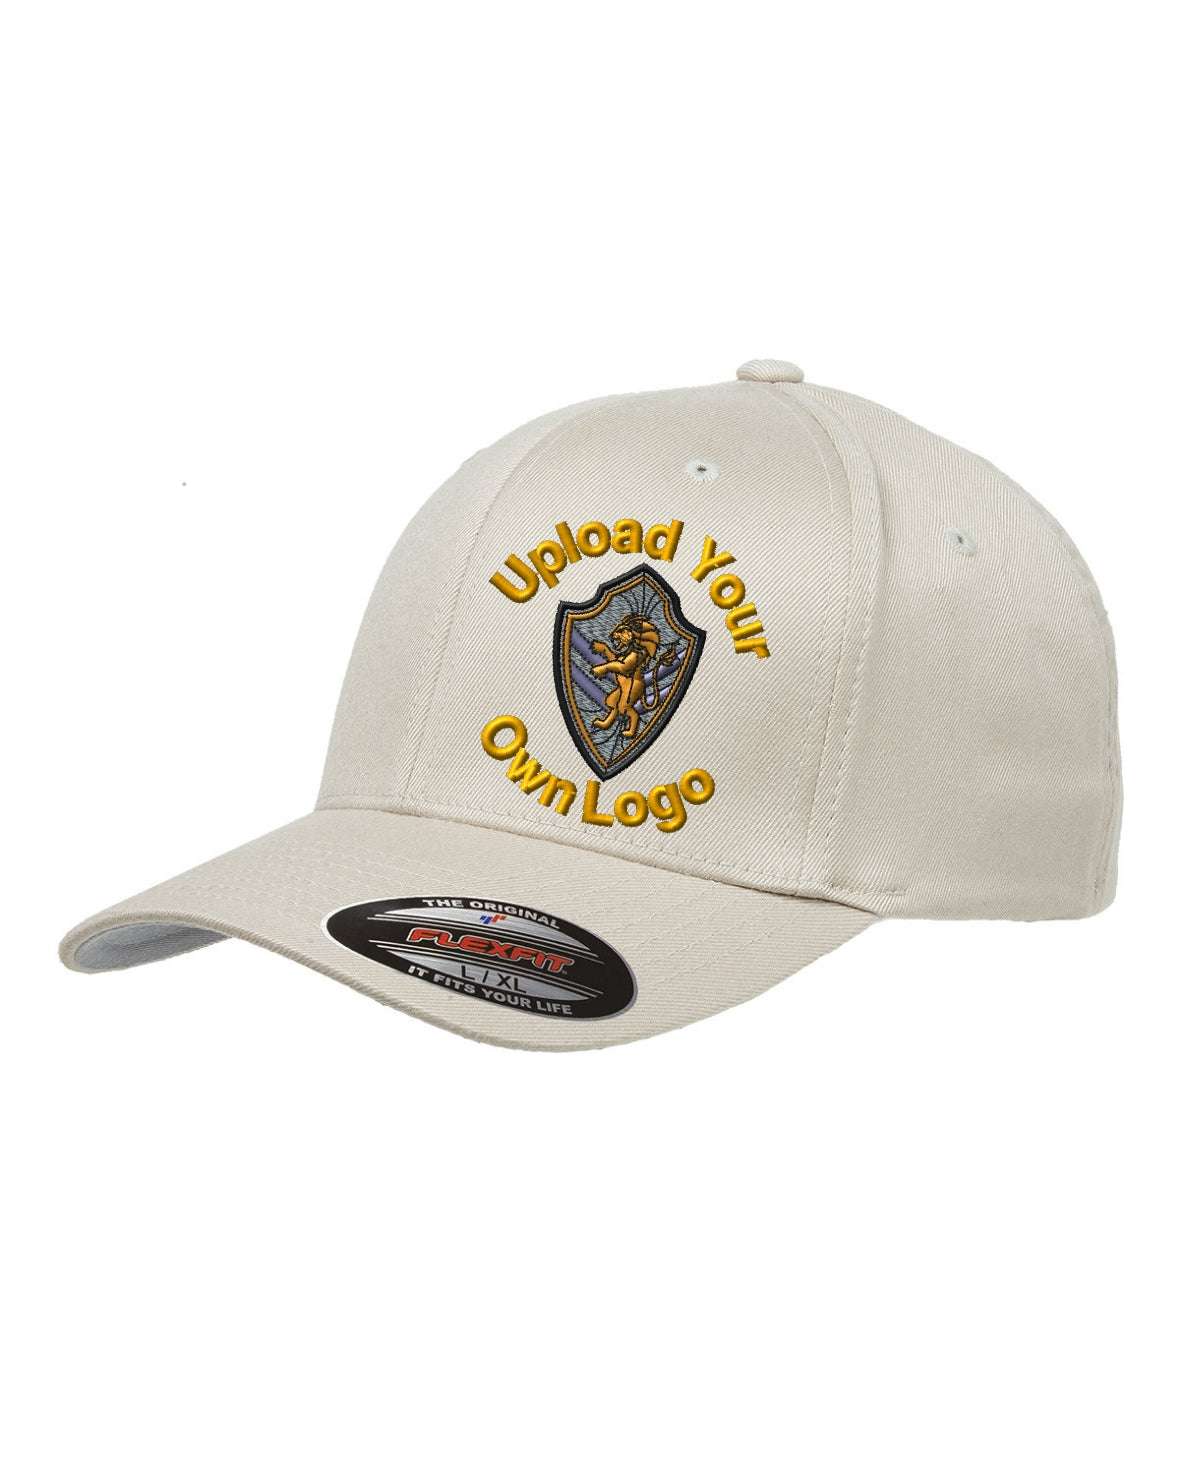 Flex Fitted Ball Cap with Your Company Logo Embroidered - khaki